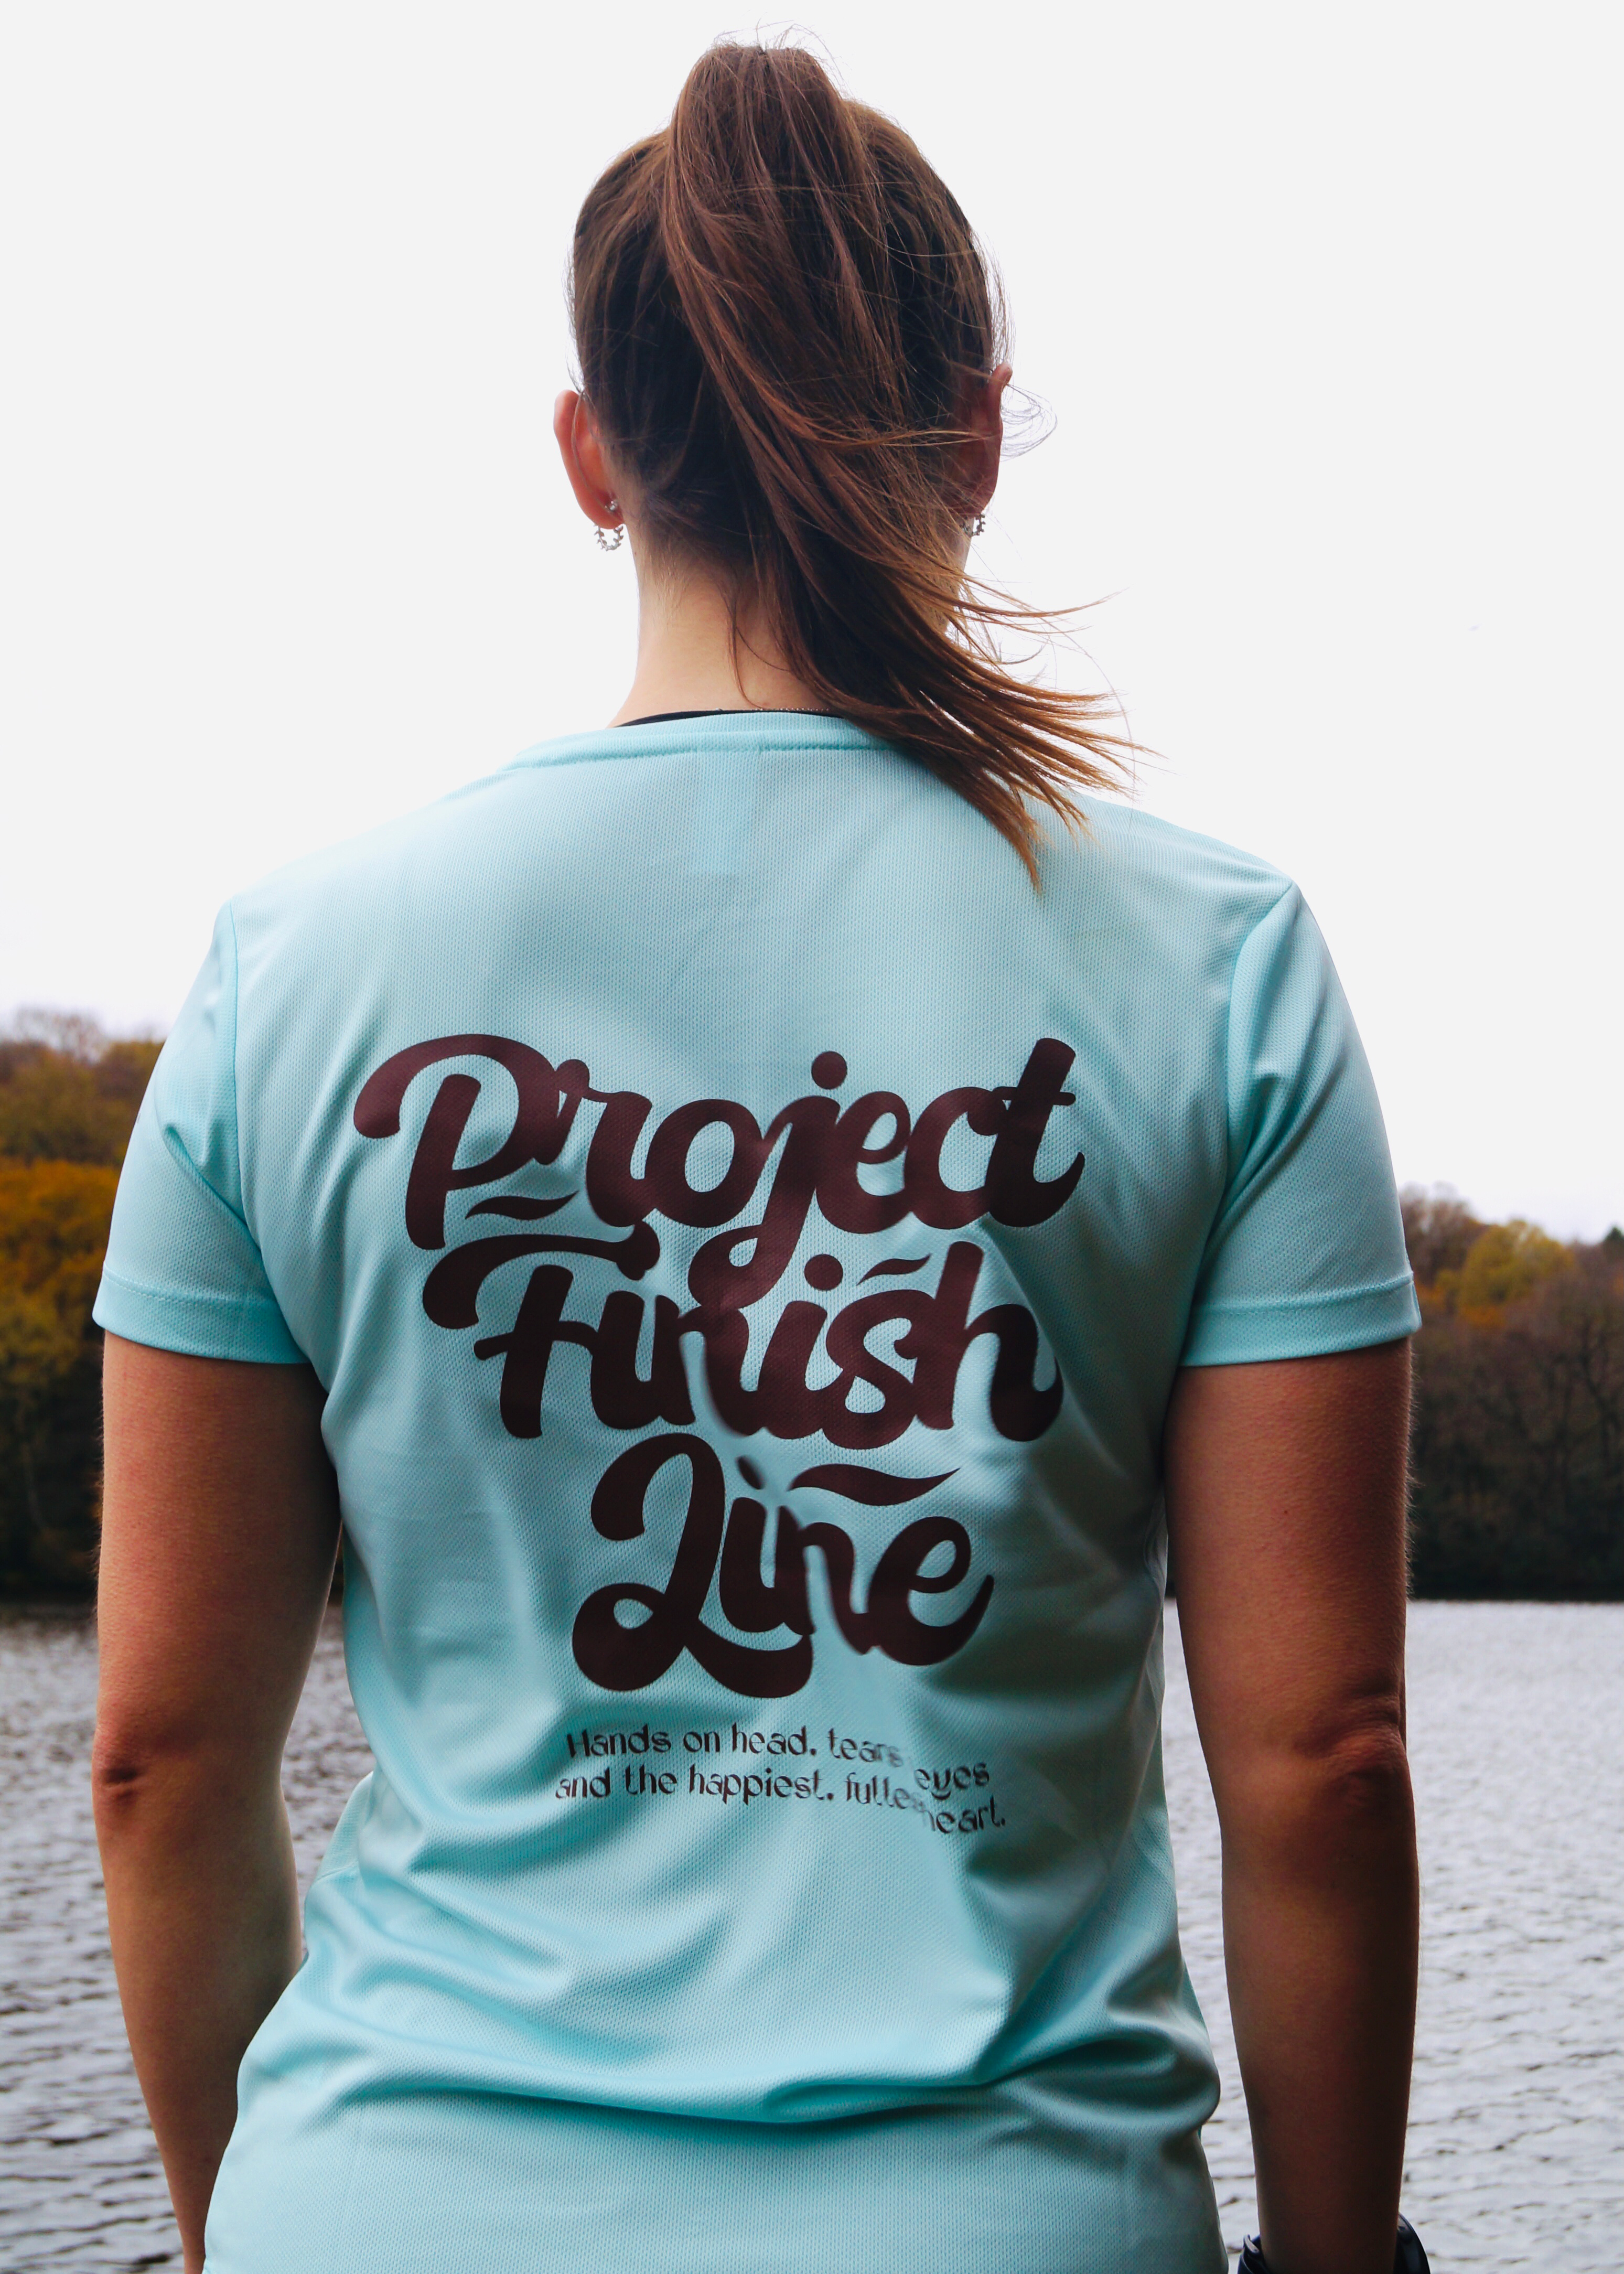 NEW! OA ‘Project Finish Line’  Tee